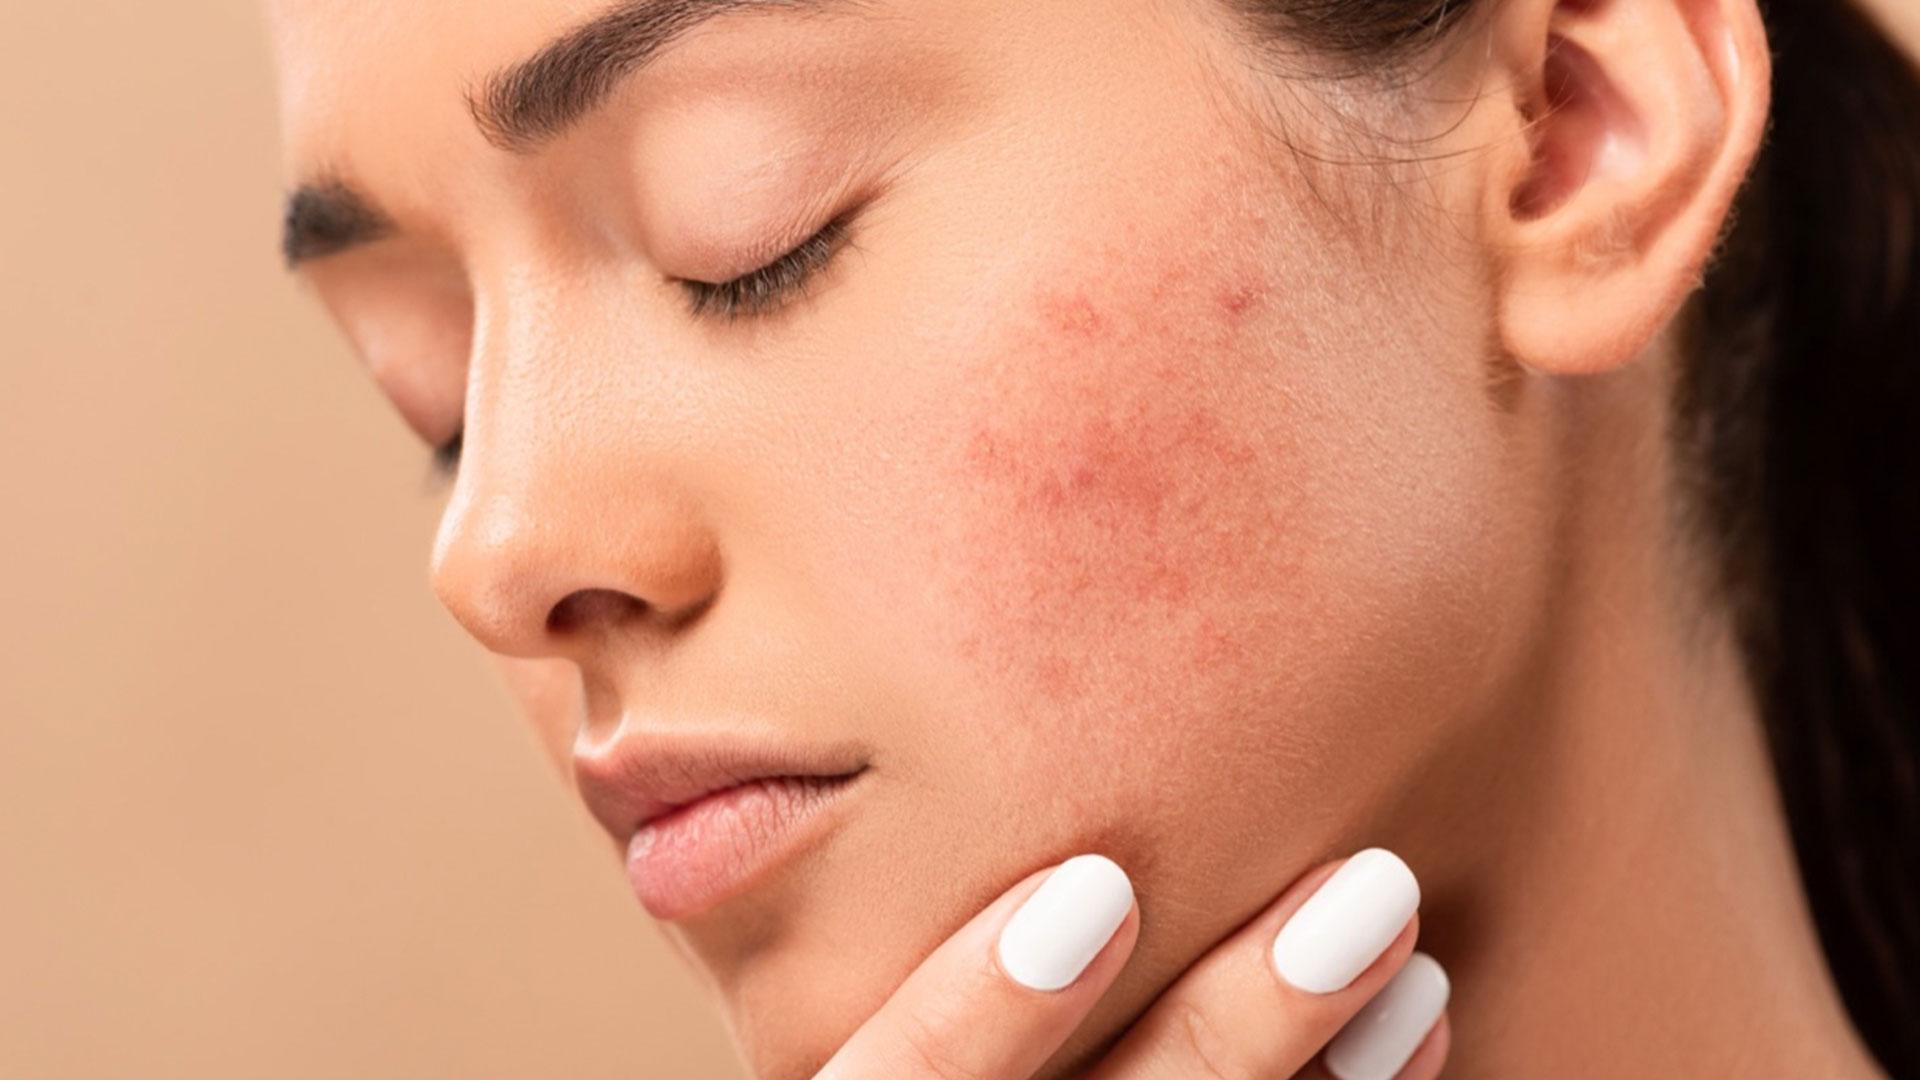 Blog: The Battle Against Acne Scars: Causes and Treatments